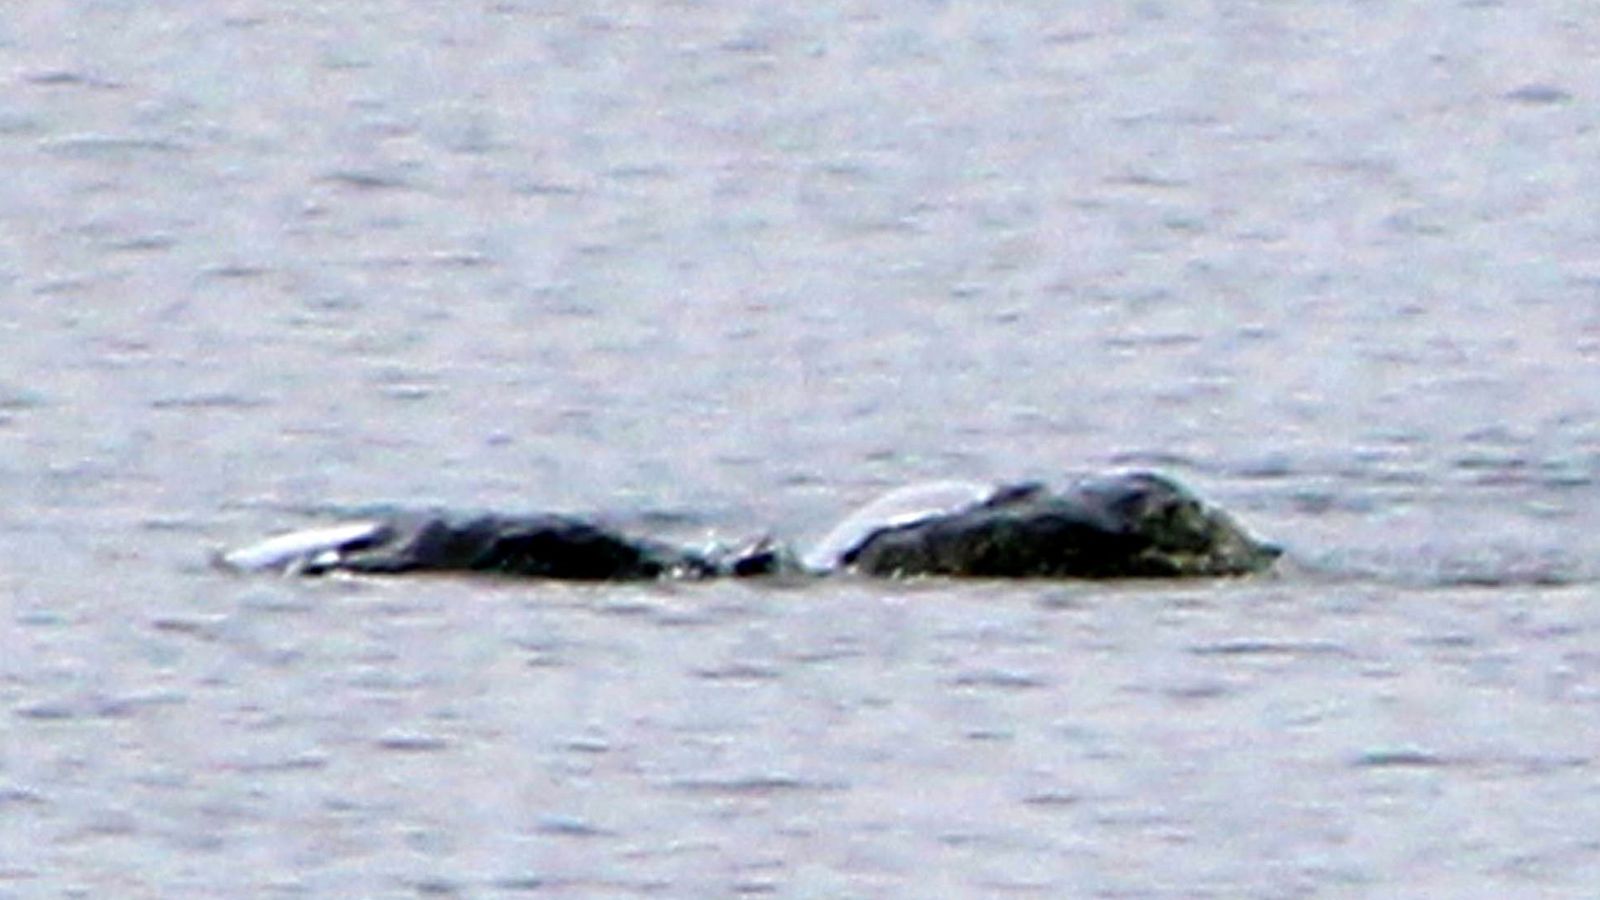 Unseen picture emerges of 'Loch Ness monster'